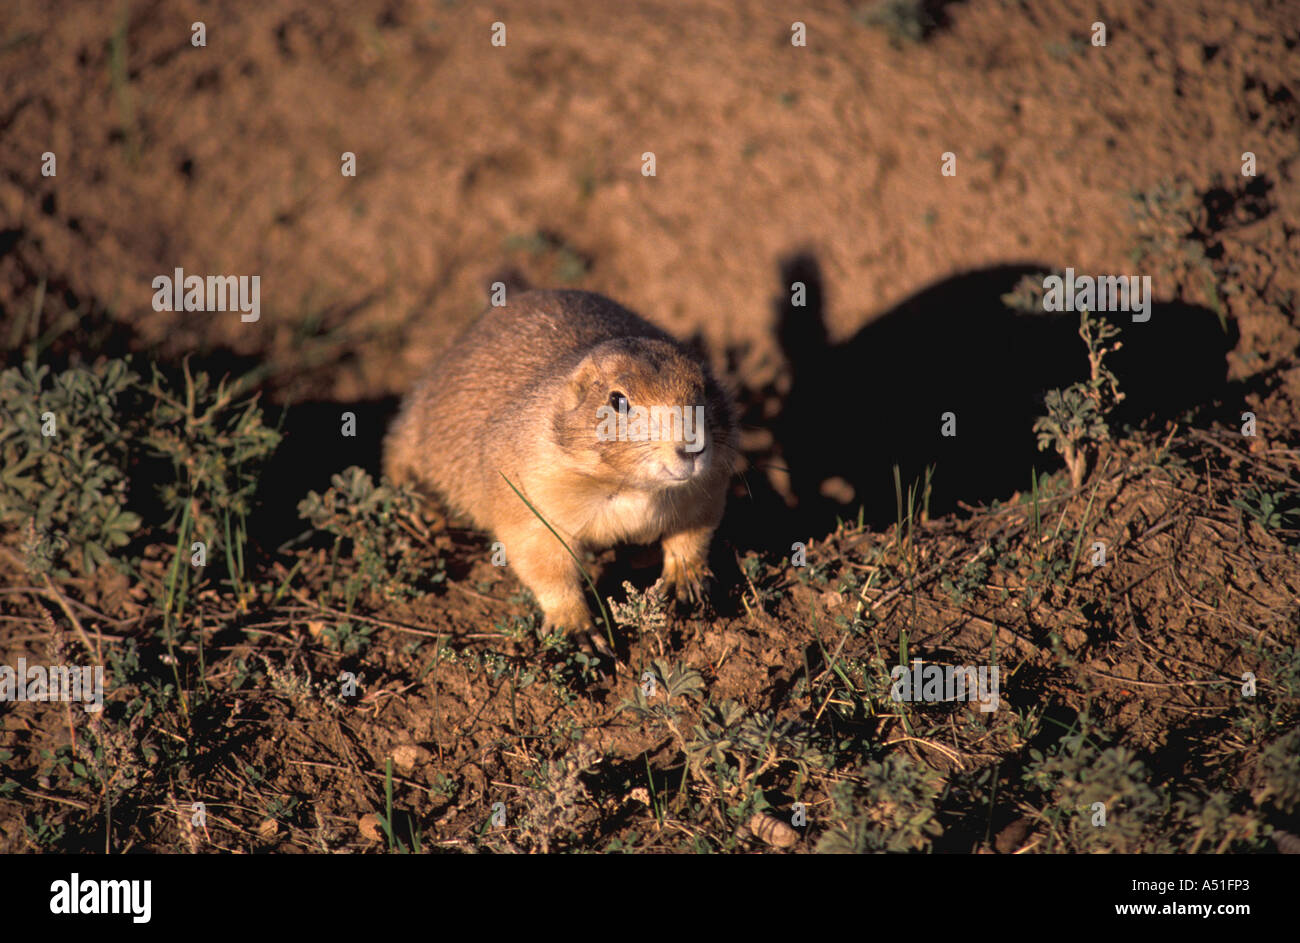 South Dakota prairie dog at entrance to its burrow looking out wildlife animals nature Stock Photo